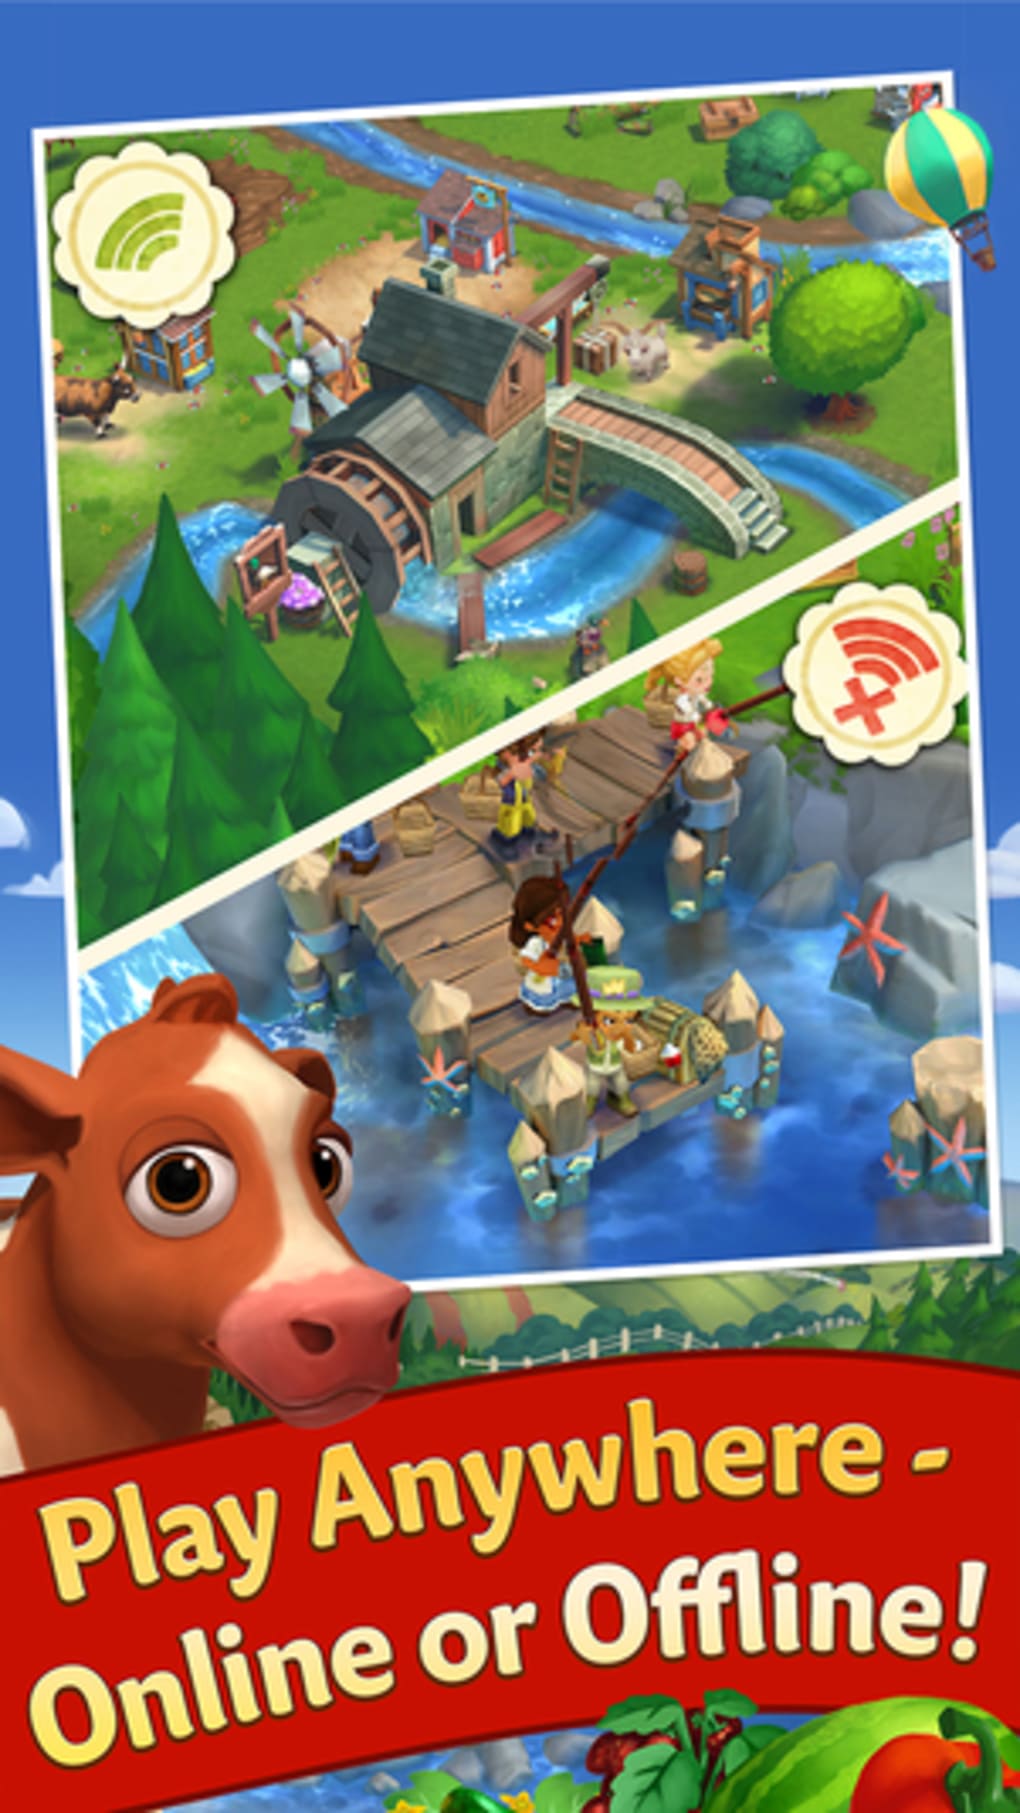 Farmville 2: Country Escape - Download This Farming Game Now